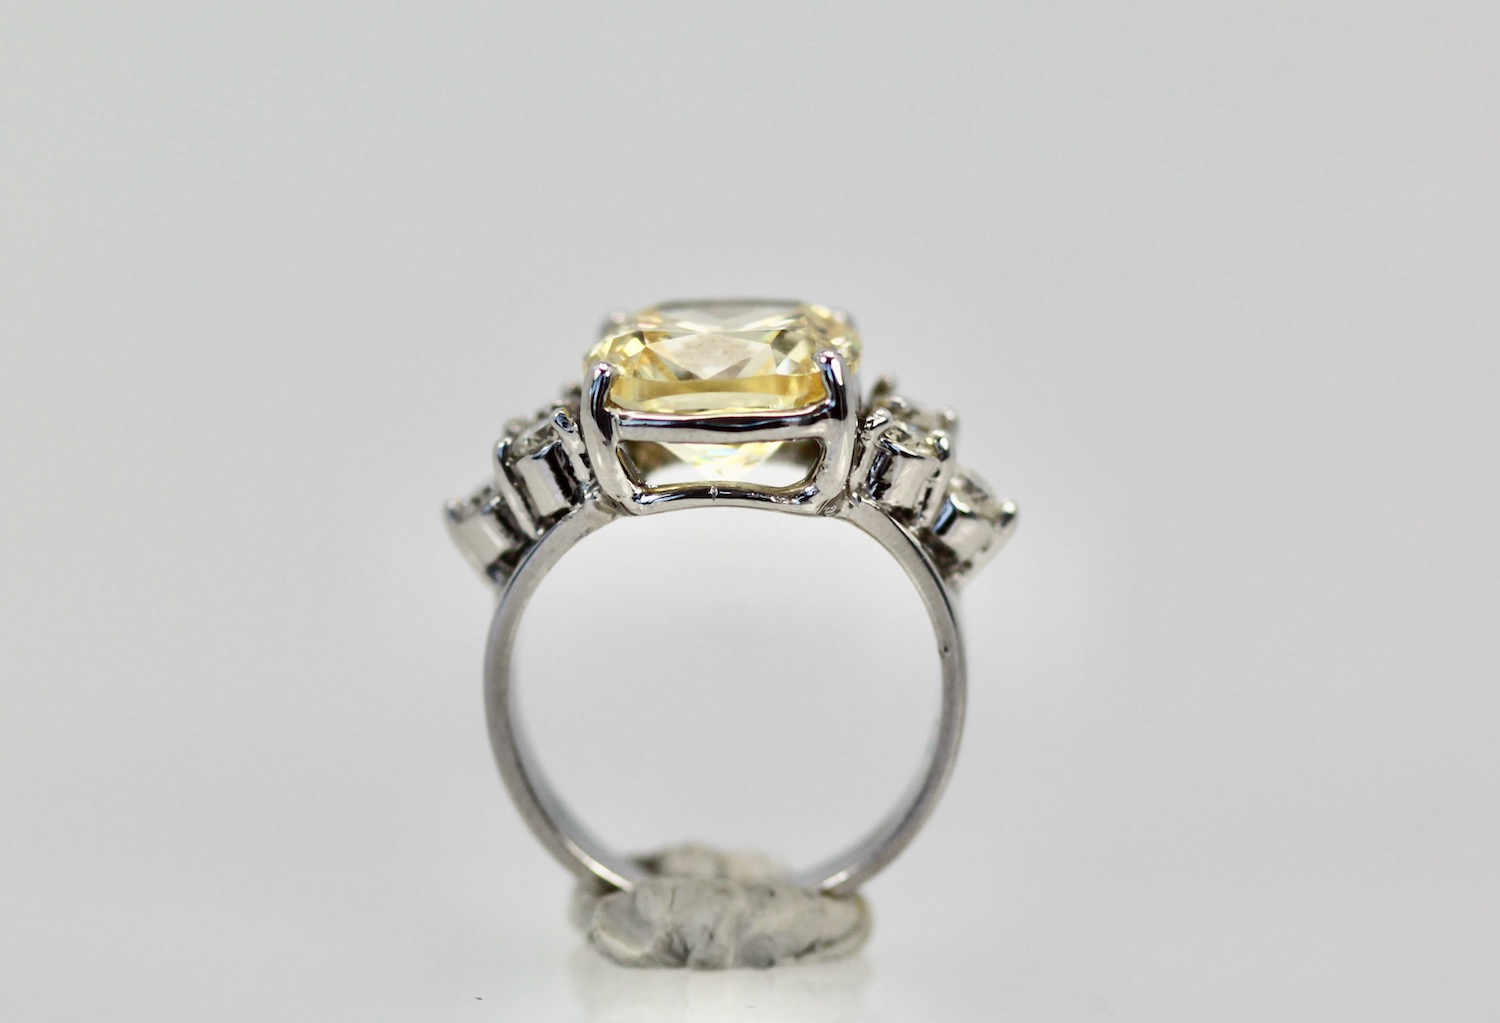 Large Yellow Sapphire Ring with Diamond Side Accents – on stand